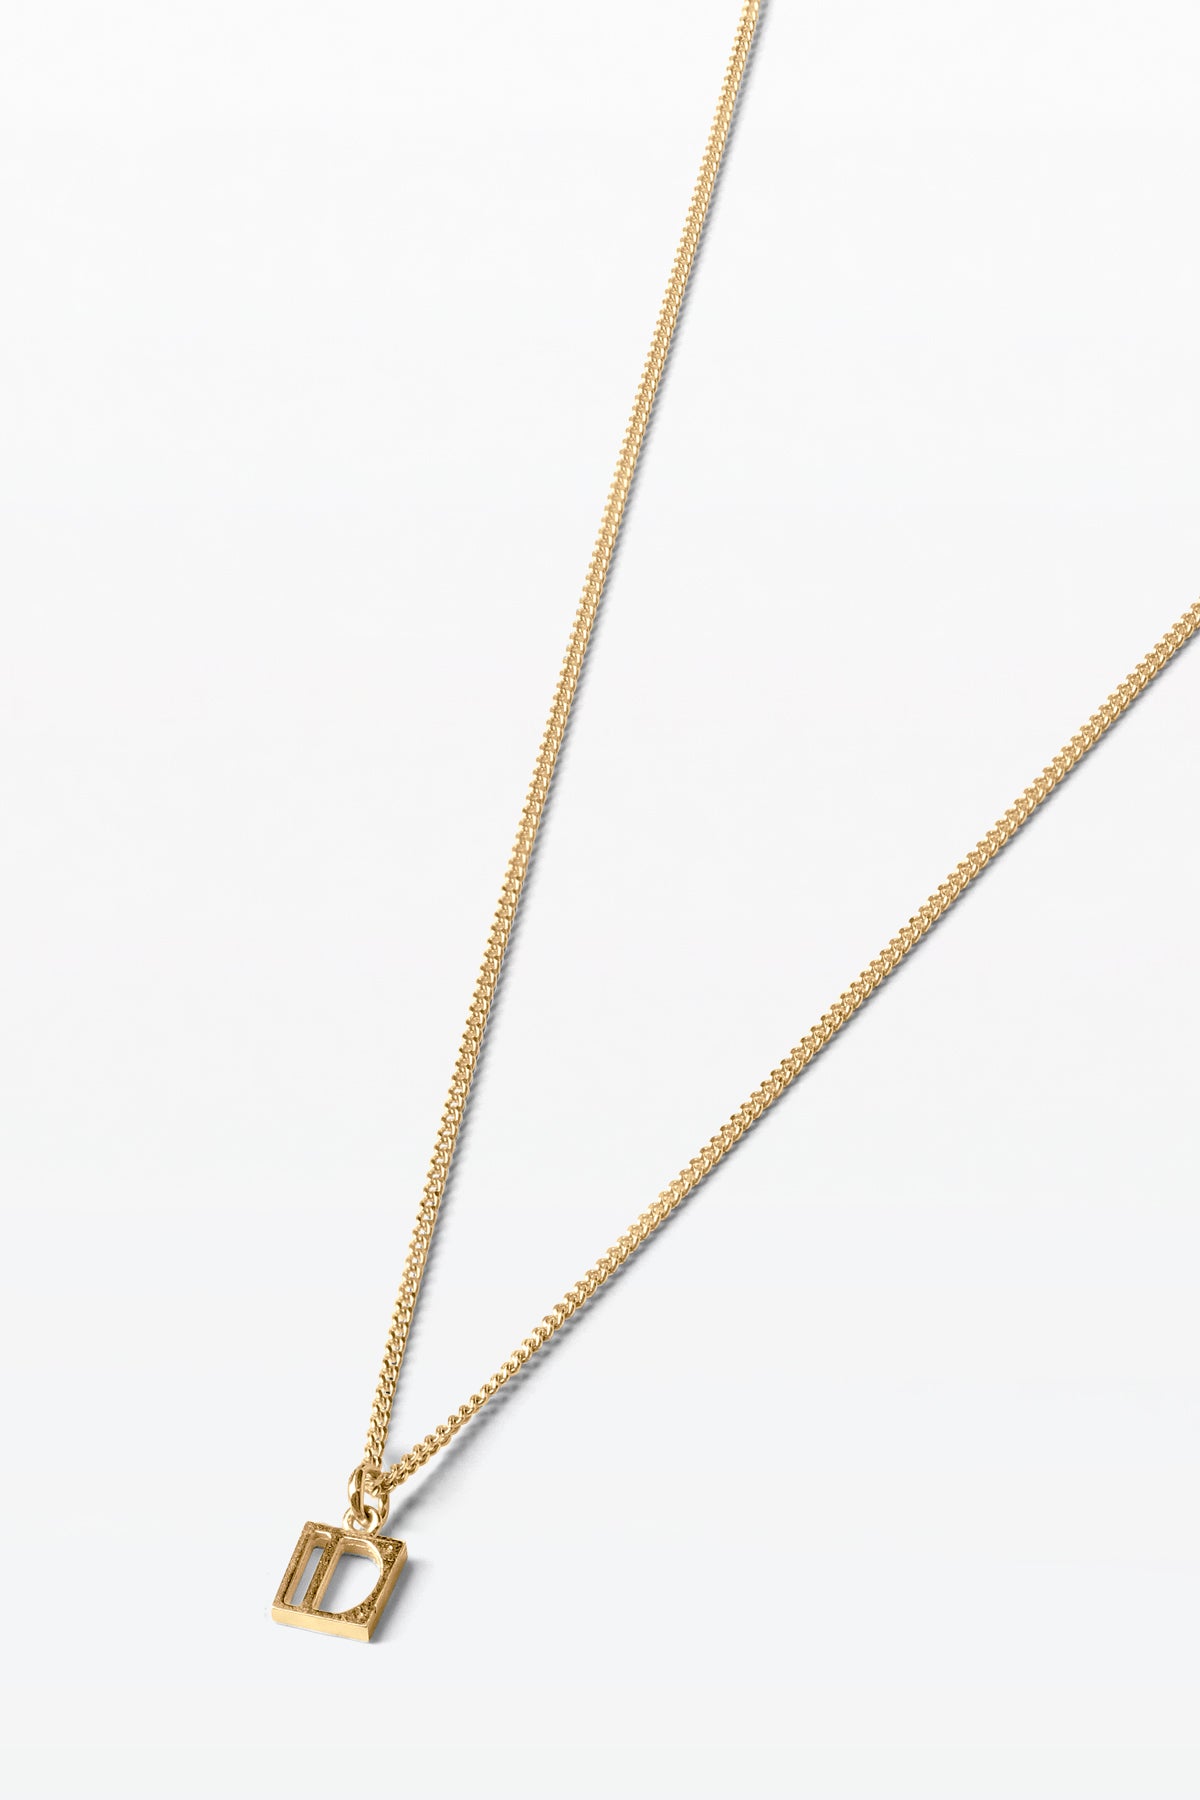 Arven Necklace 01 Gold Plated Silver - 45cm